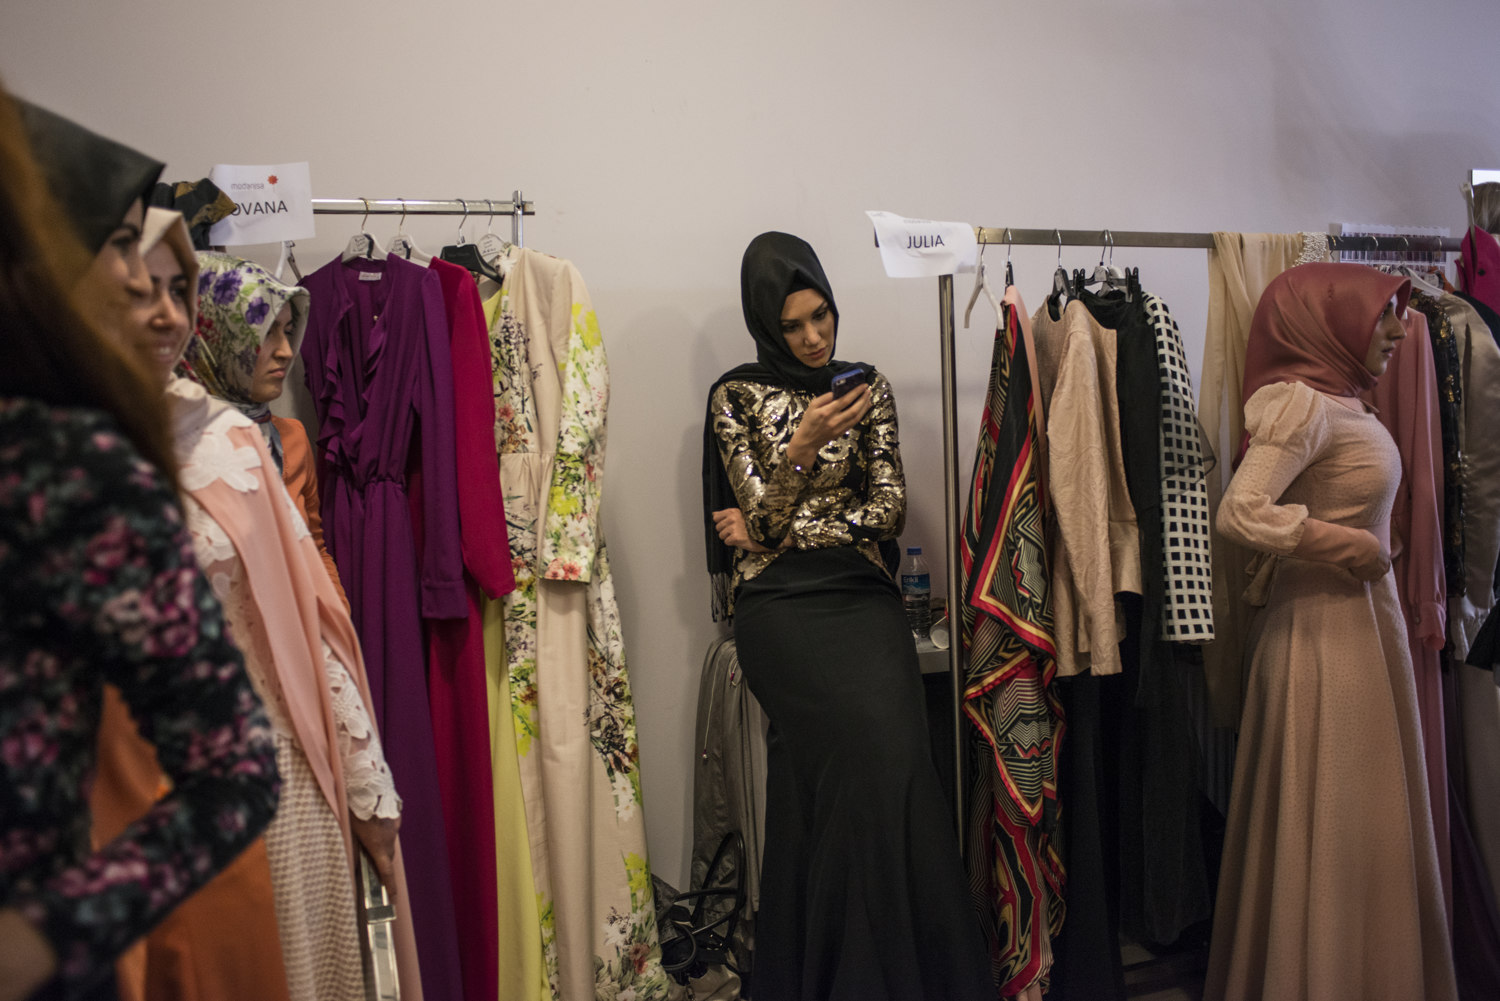  Backstage at the Modanisa fashion show on May 28th, 2014 in Istanbul, Turkey. 